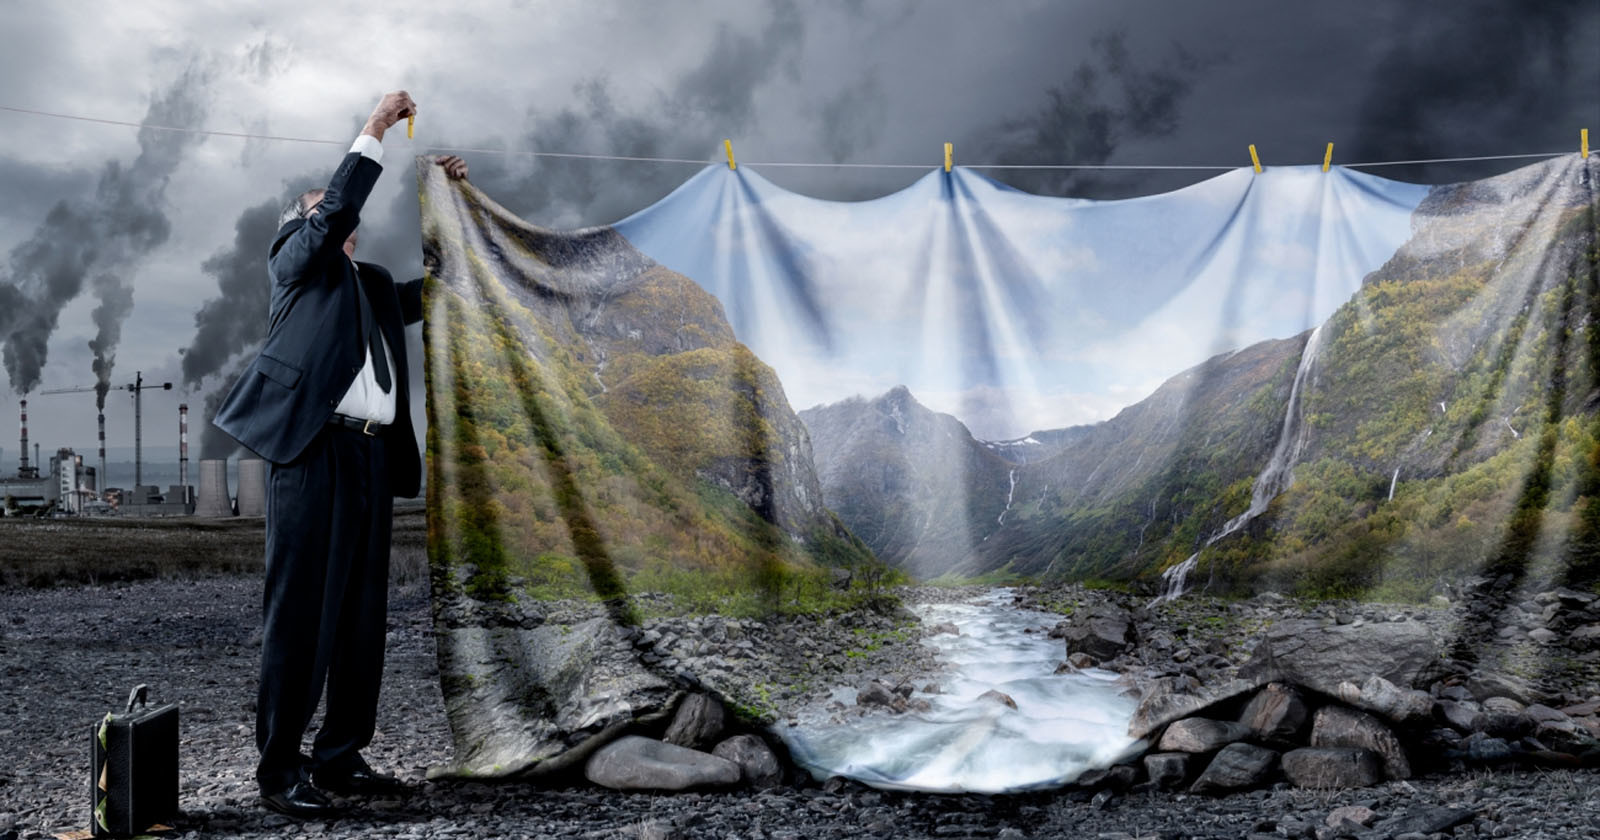 Climate Change-Themed Image Wins the 2022 Creative Photo Awards